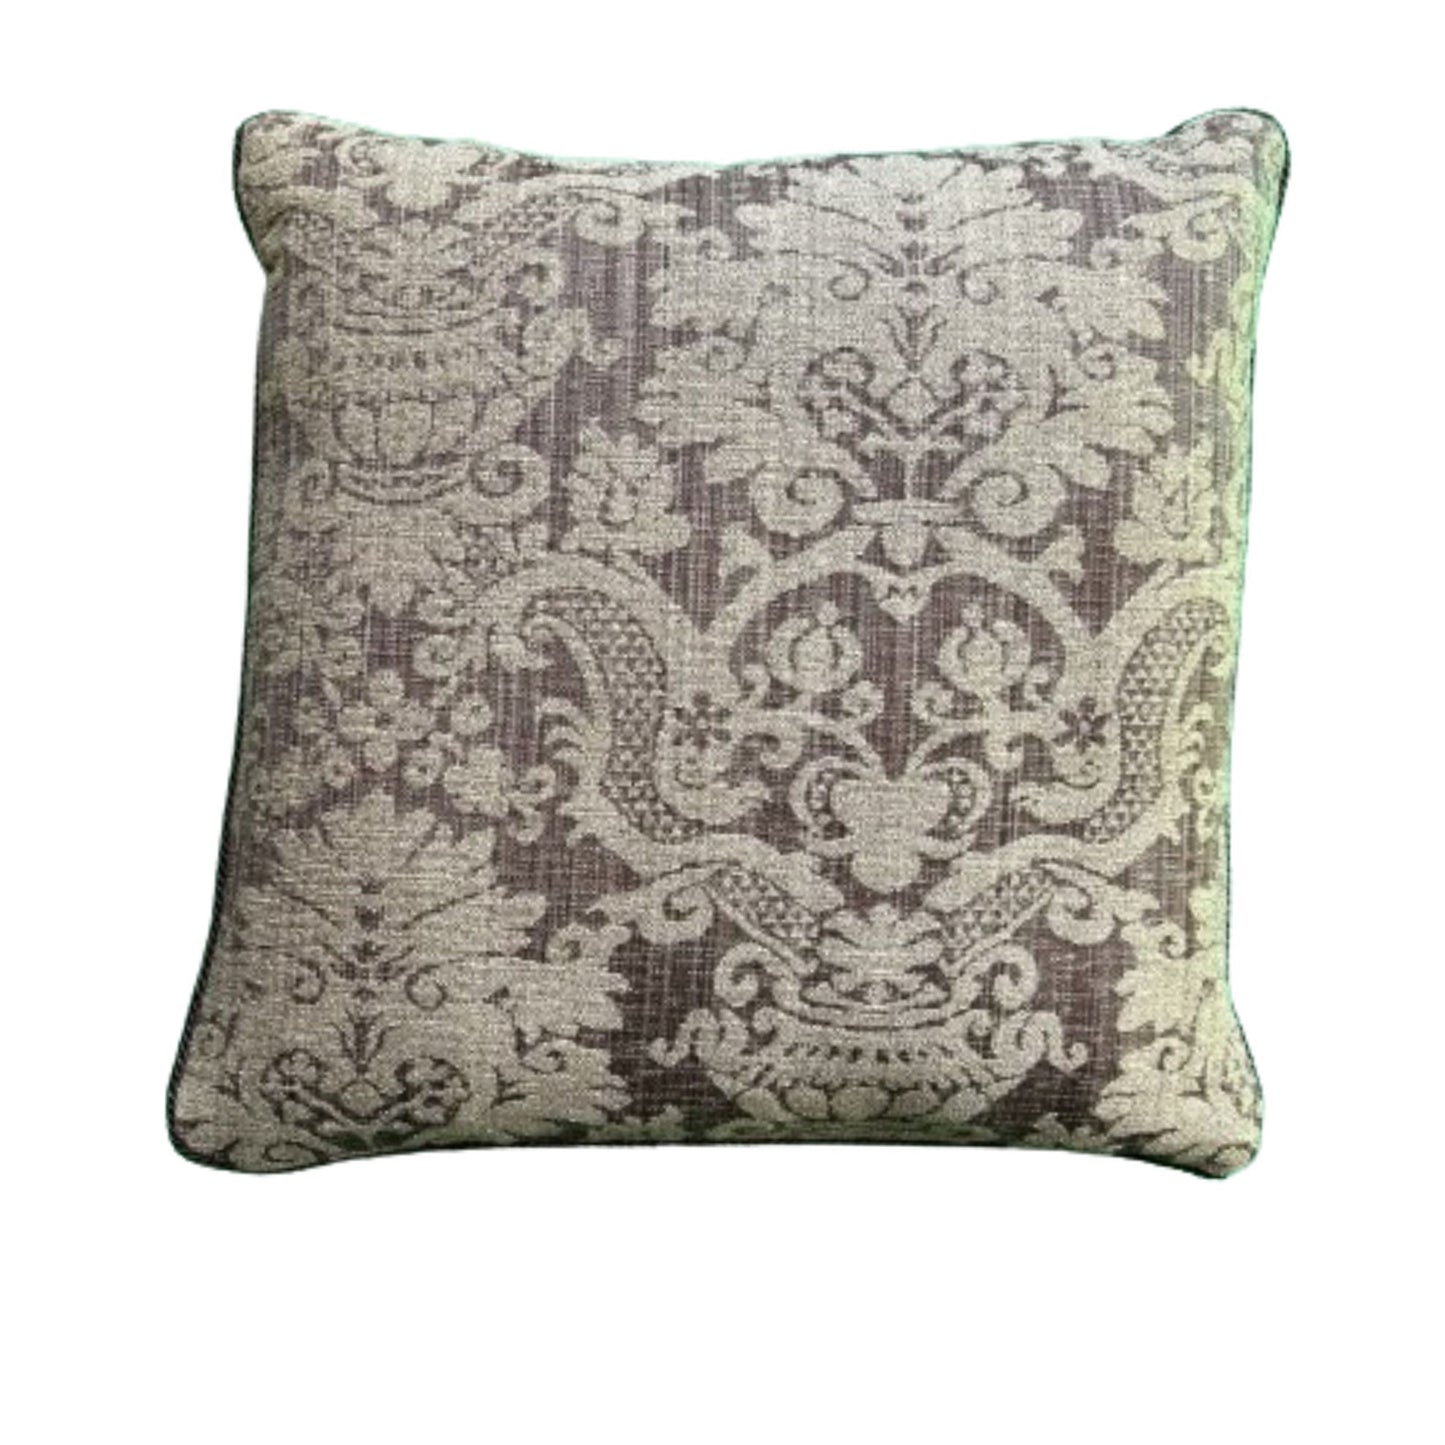 Beacon Hill Antique Java Damask 16 x 16 Pillow with Down Feather Insert